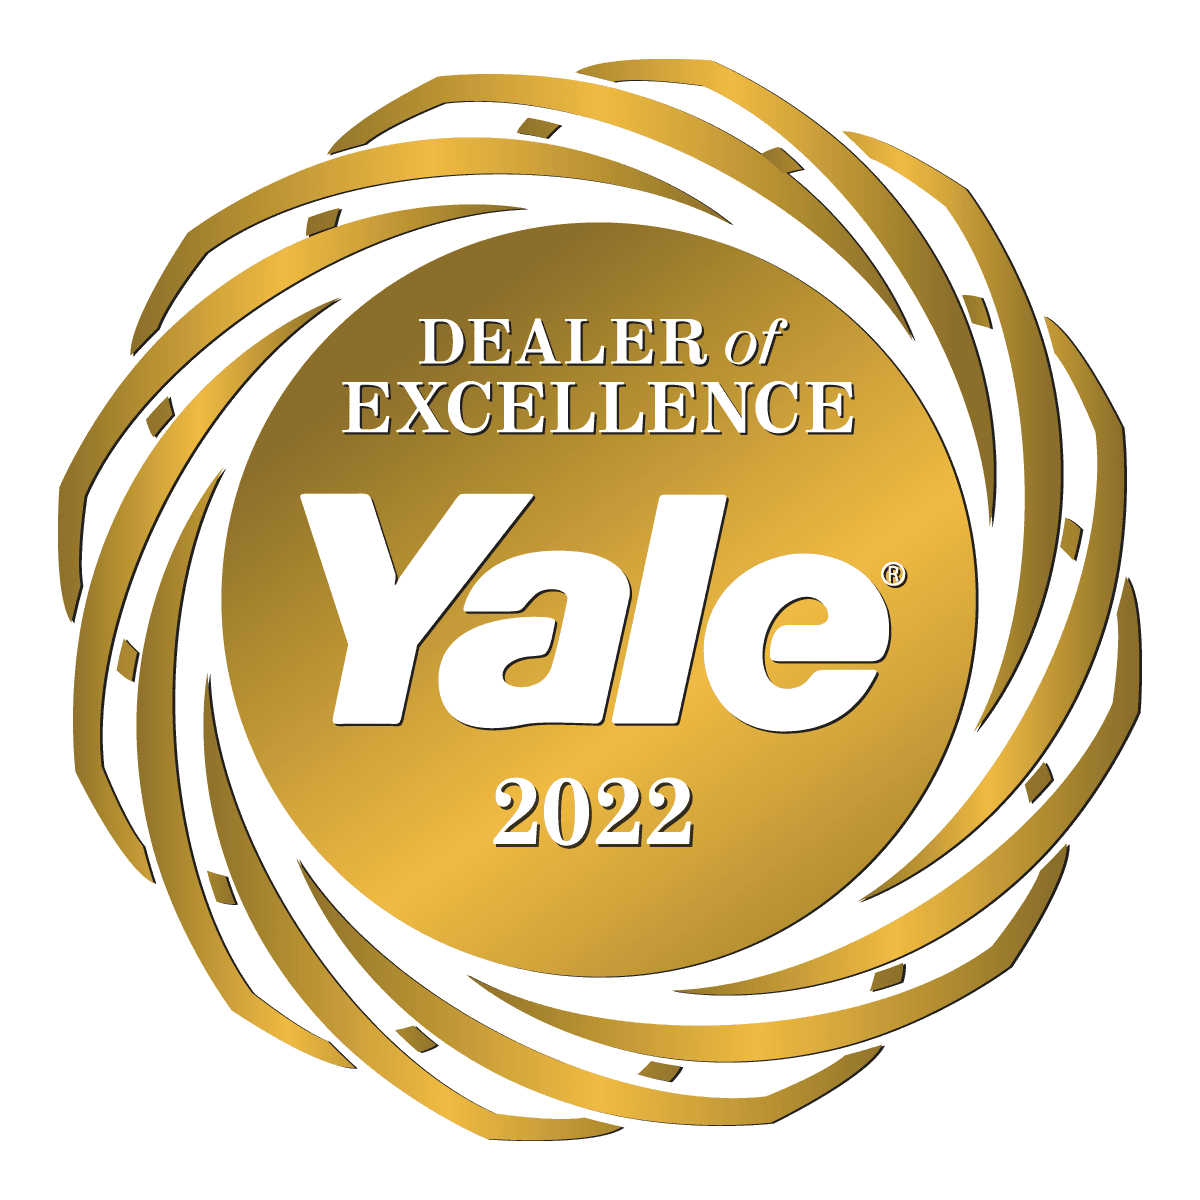 Hyster-Yale Dealer of Excellence